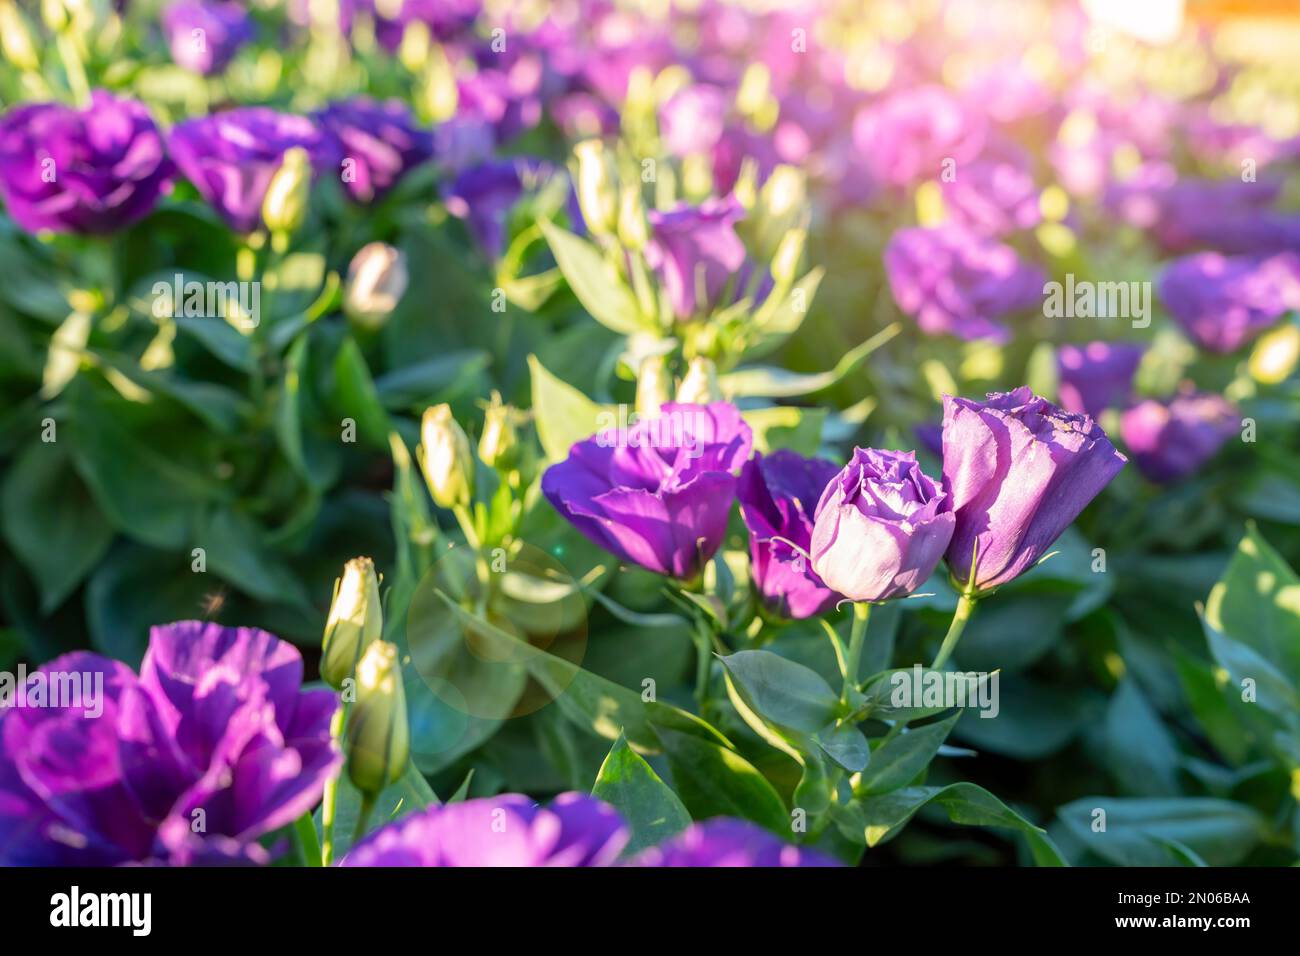 Violet Lisianthus flower in a garden with sunlight. Stock Photo